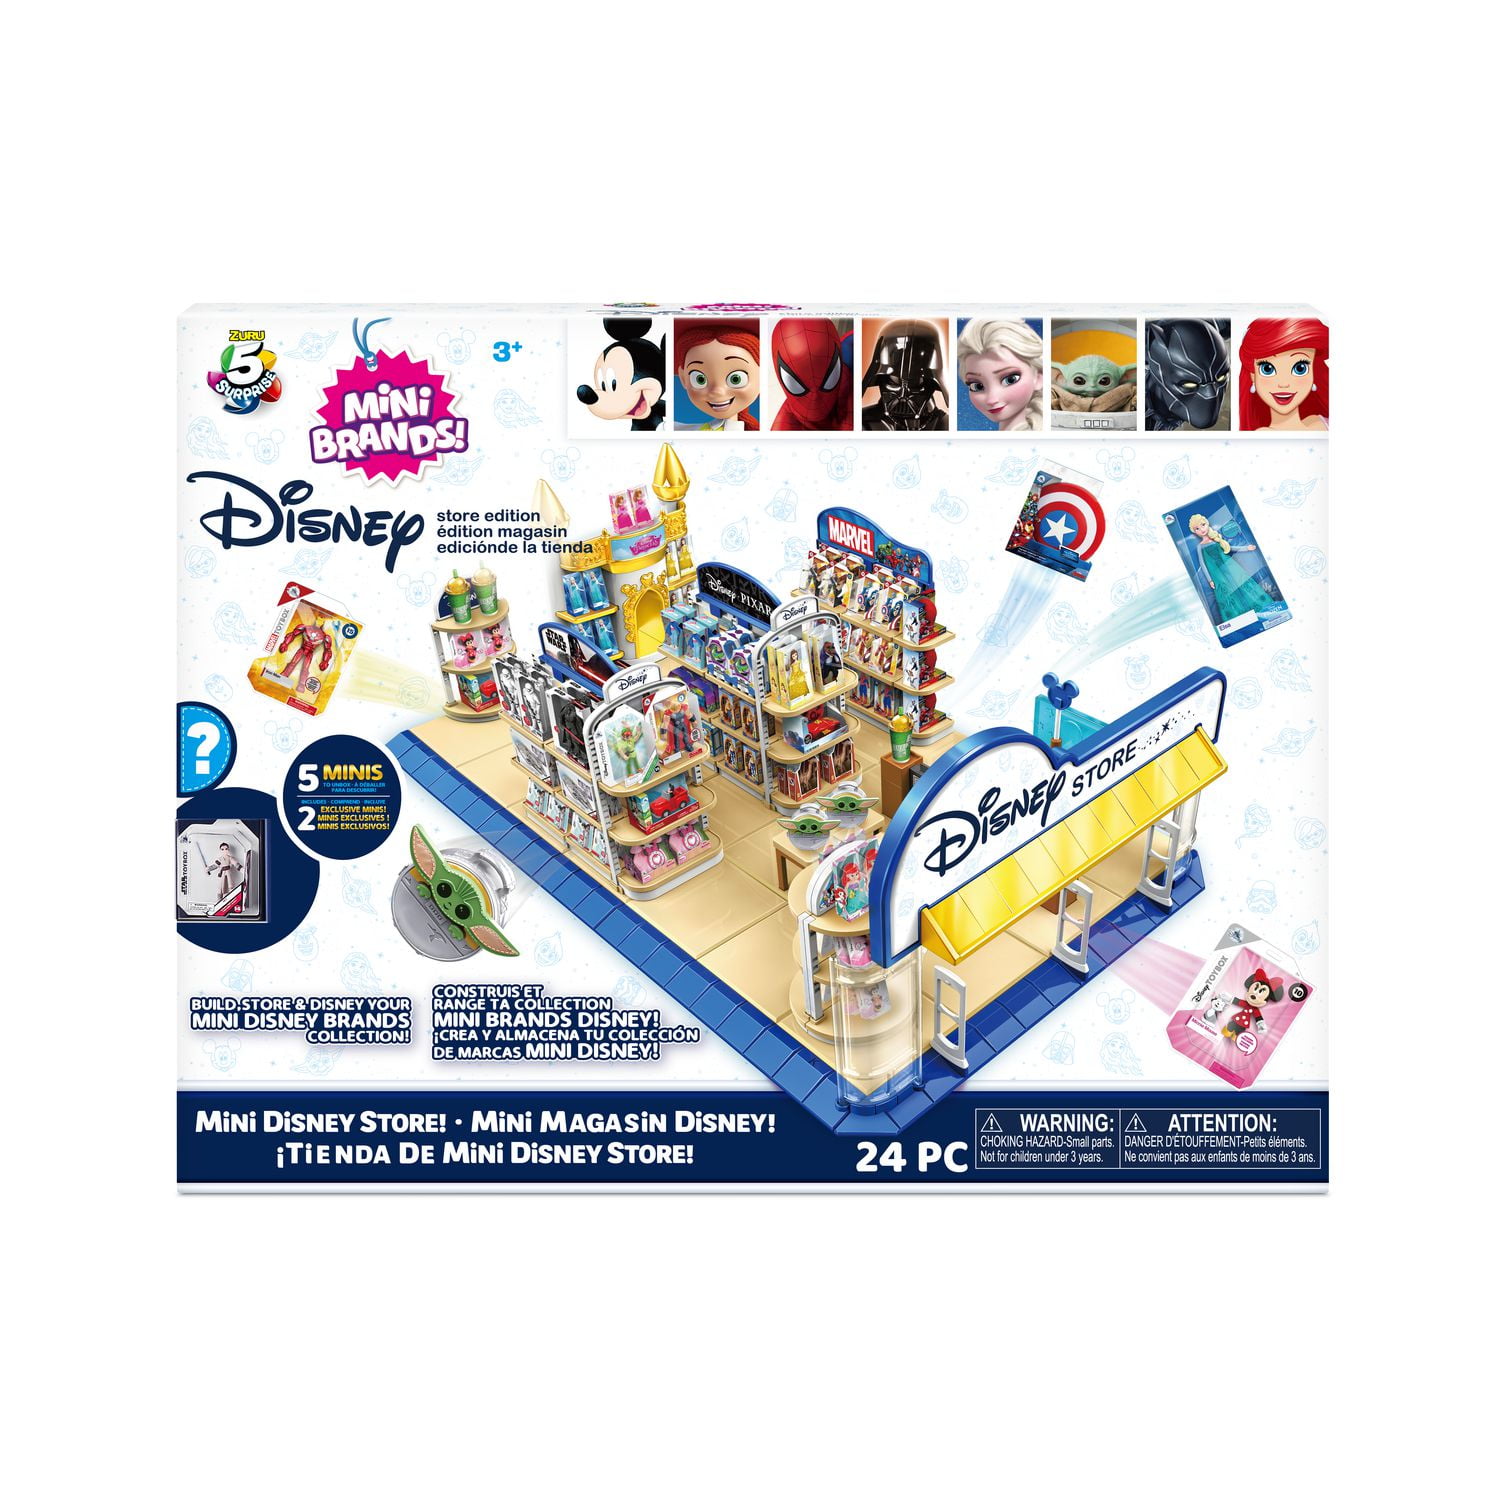 5 Surprise Disney Store Mini Brands Toy Store Playset with 2 Exclusive Minis,  By Zuru 